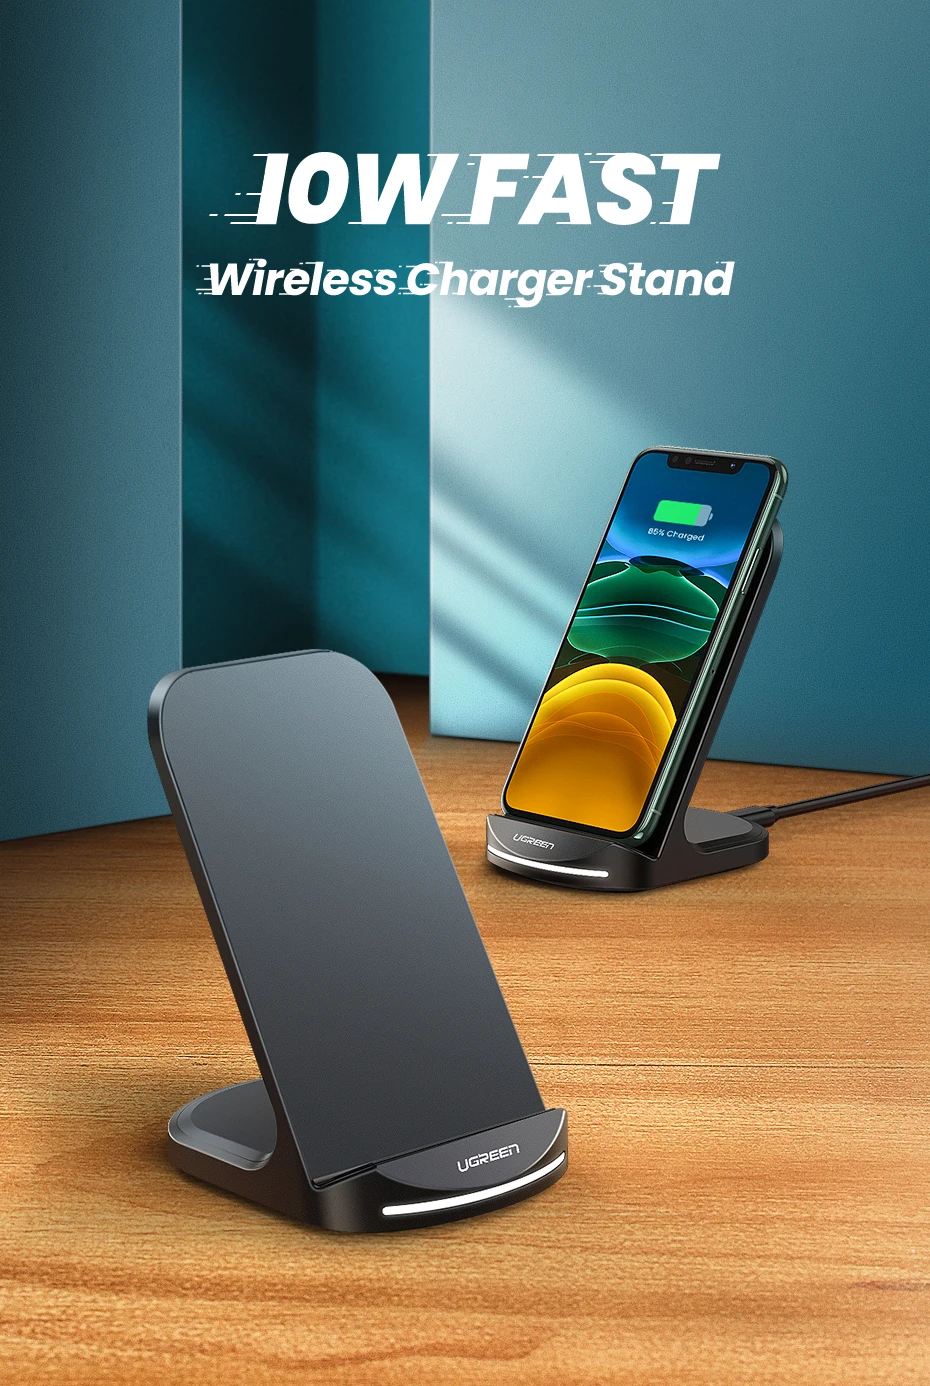 Ugreen qi wireless charger stand for iphone 11 pro x xs 8 xr samsung s9 s10 s8 s10e fast wireless charging station phone charger